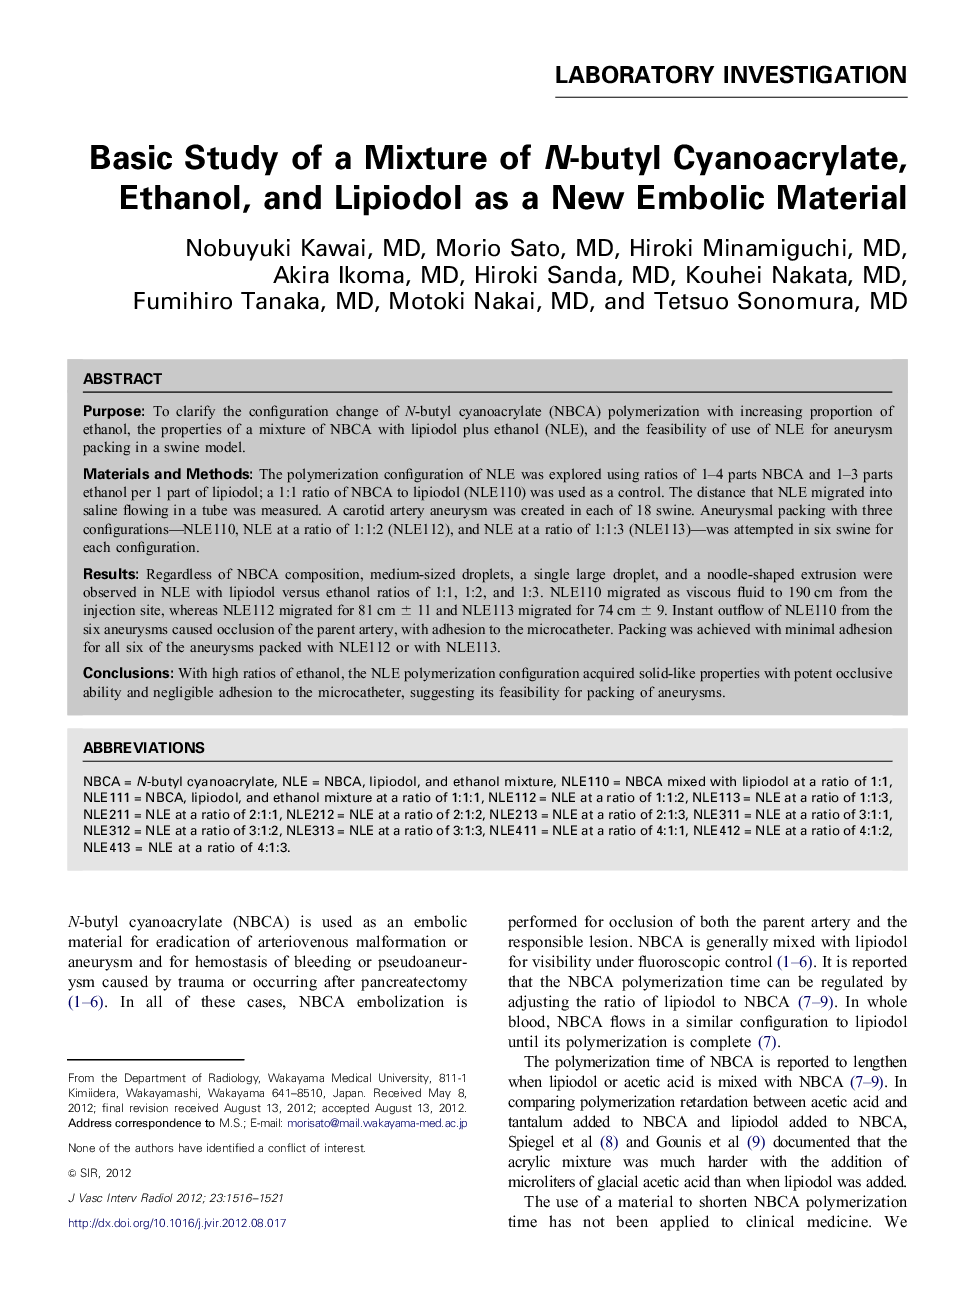 Basic Study of a Mixture of N-butyl Cyanoacrylate, Ethanol, and Lipiodol as a New Embolic Material